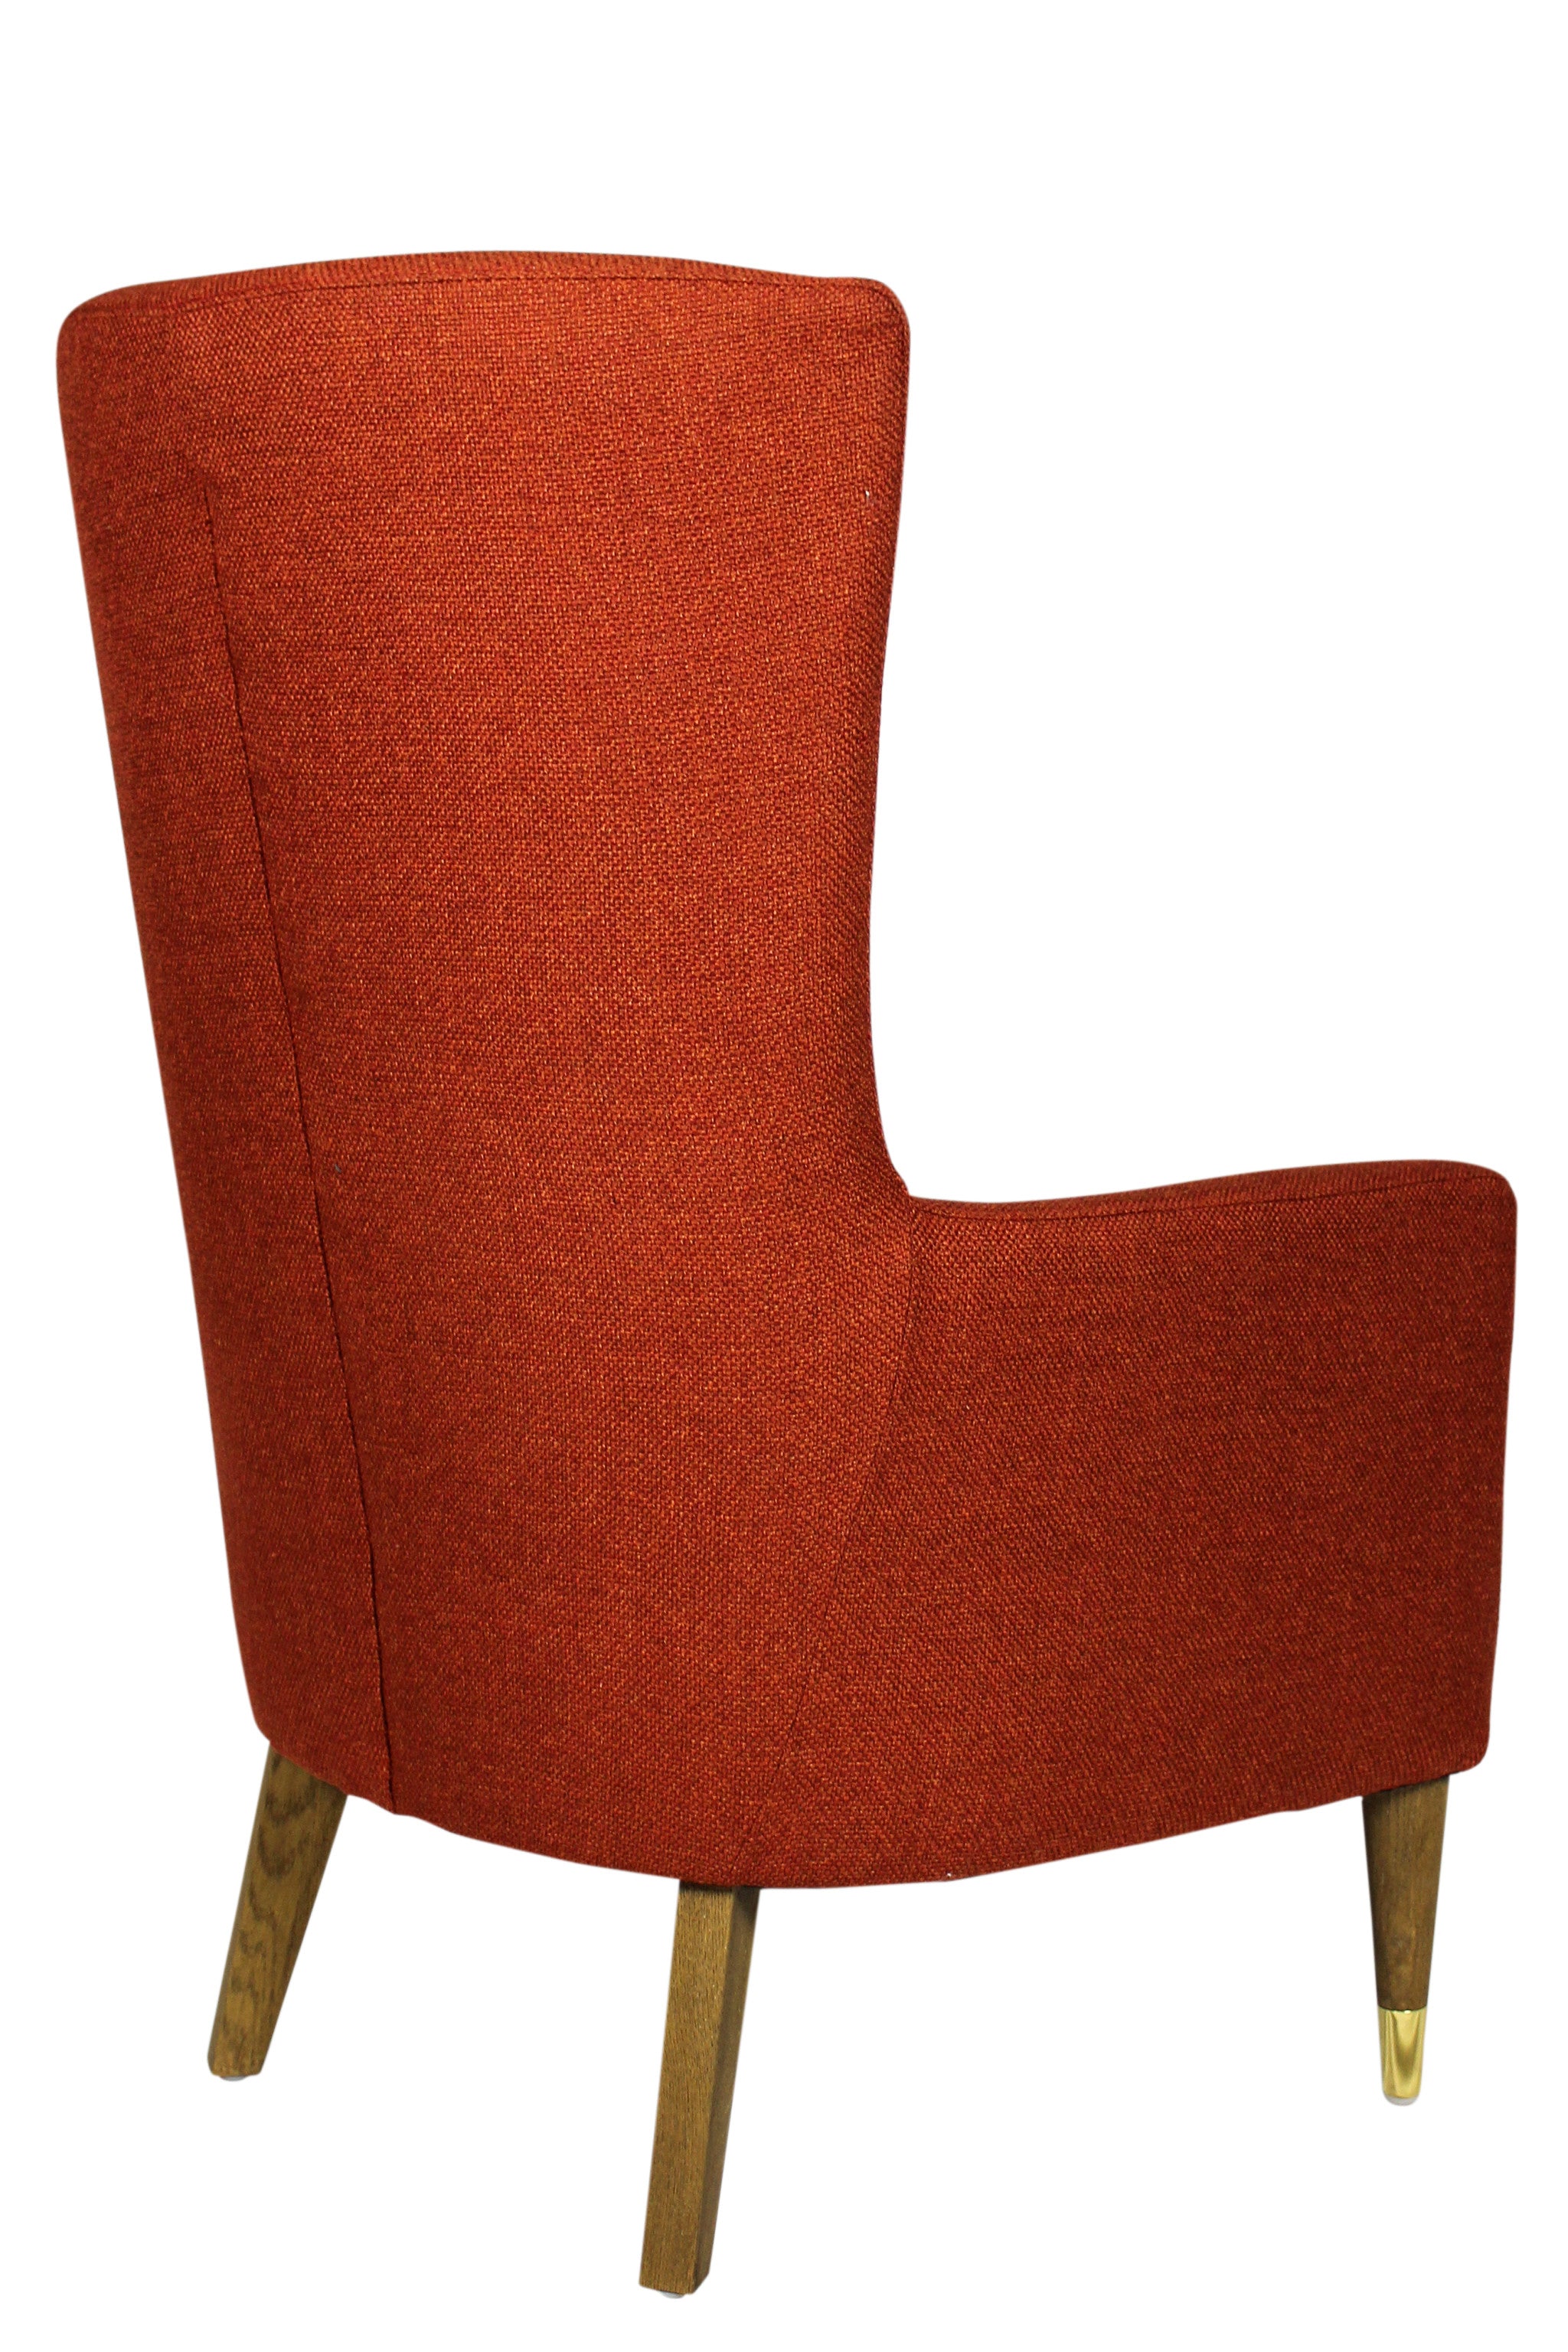 28" Orange And Natural Solid Color Lounge Chair